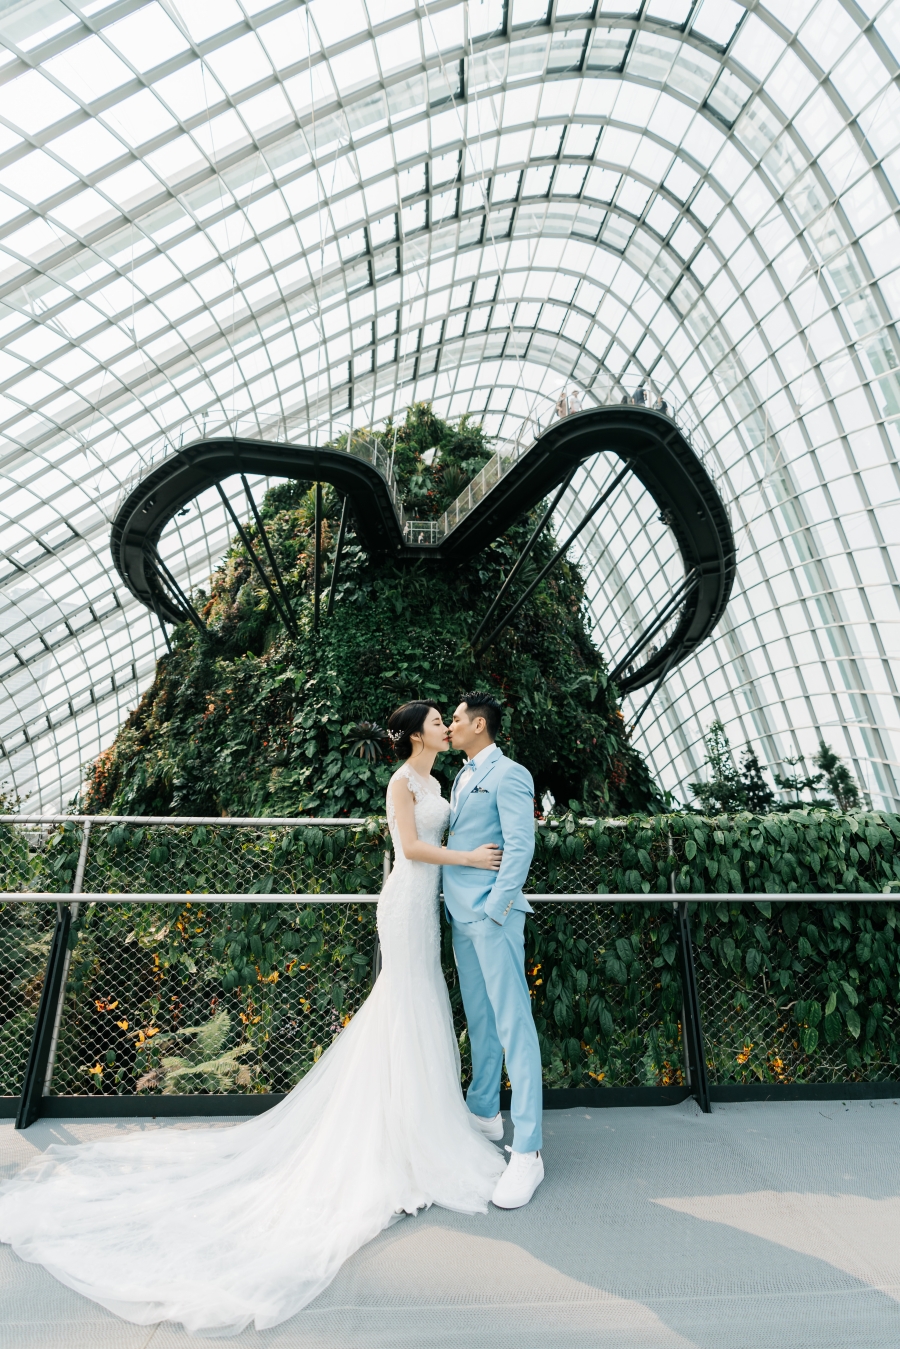 Singapore Pre-Wedding Photoshoot At Cloud Forest, Fort Canning Spiral Staircase And Marina Bay For Korean Couple  by Michael  on OneThreeOneFour 2